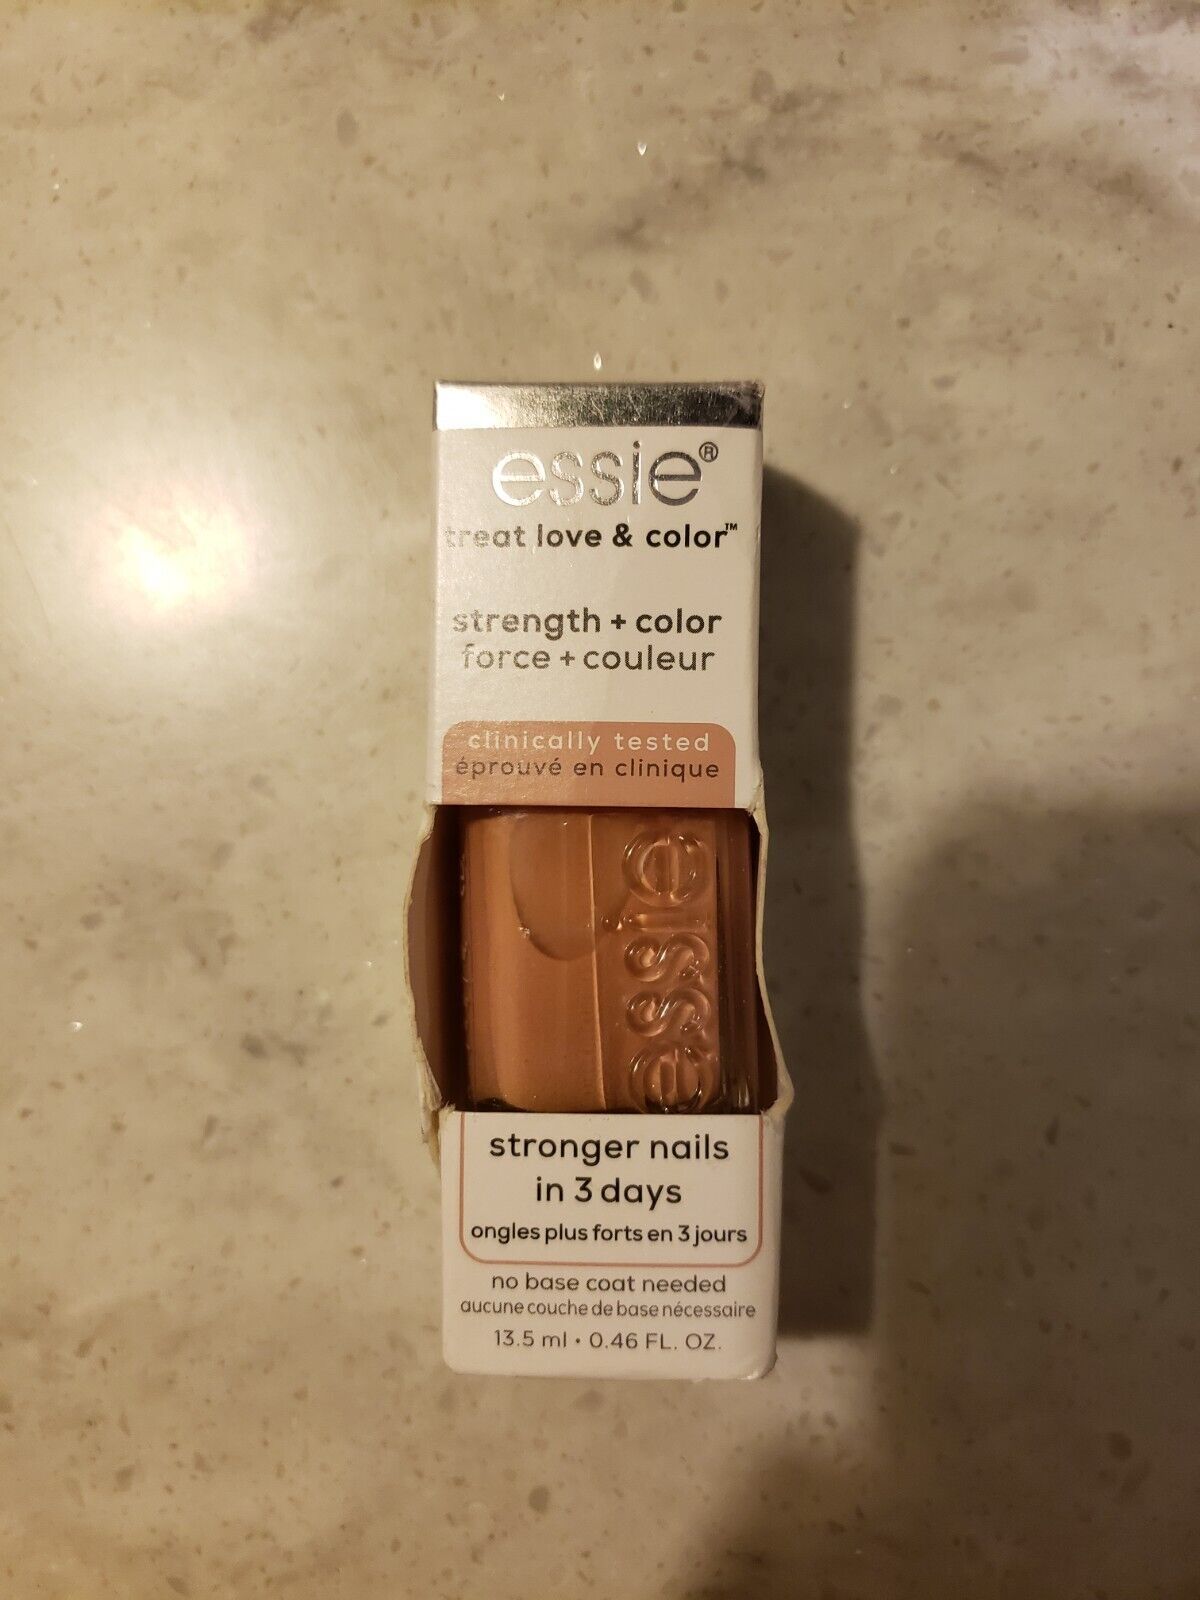 Essie Strength And Color Nail Care Polish 52 Final Stretch Full Coverage New - $7.56